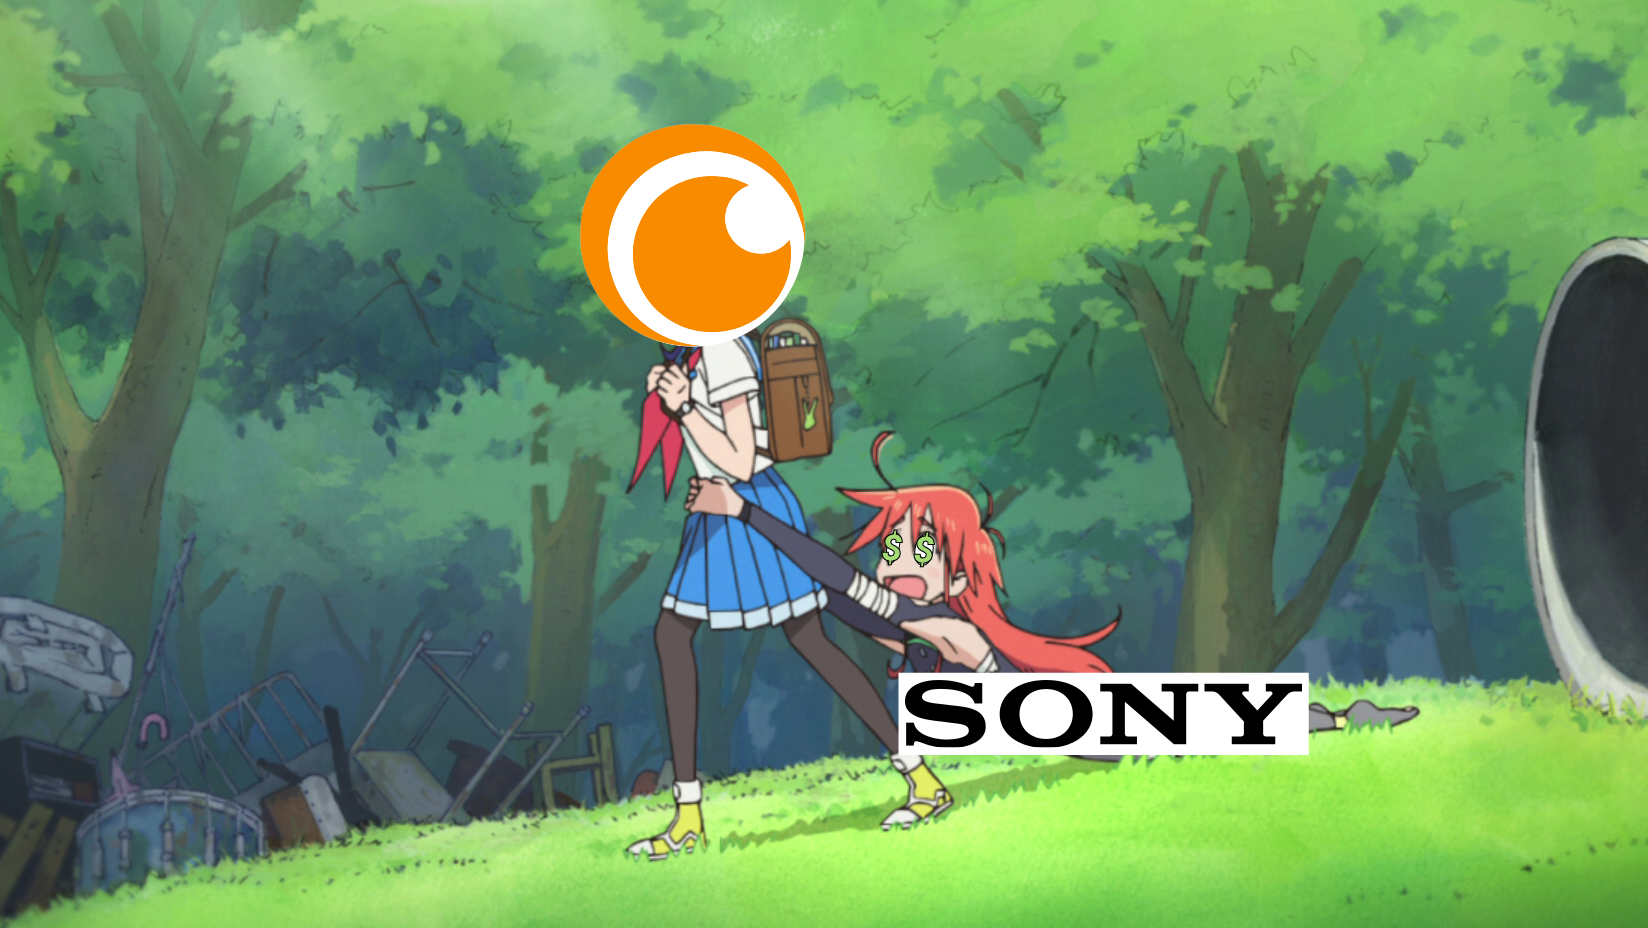 Sony pays almost a billion dollars to get some animation